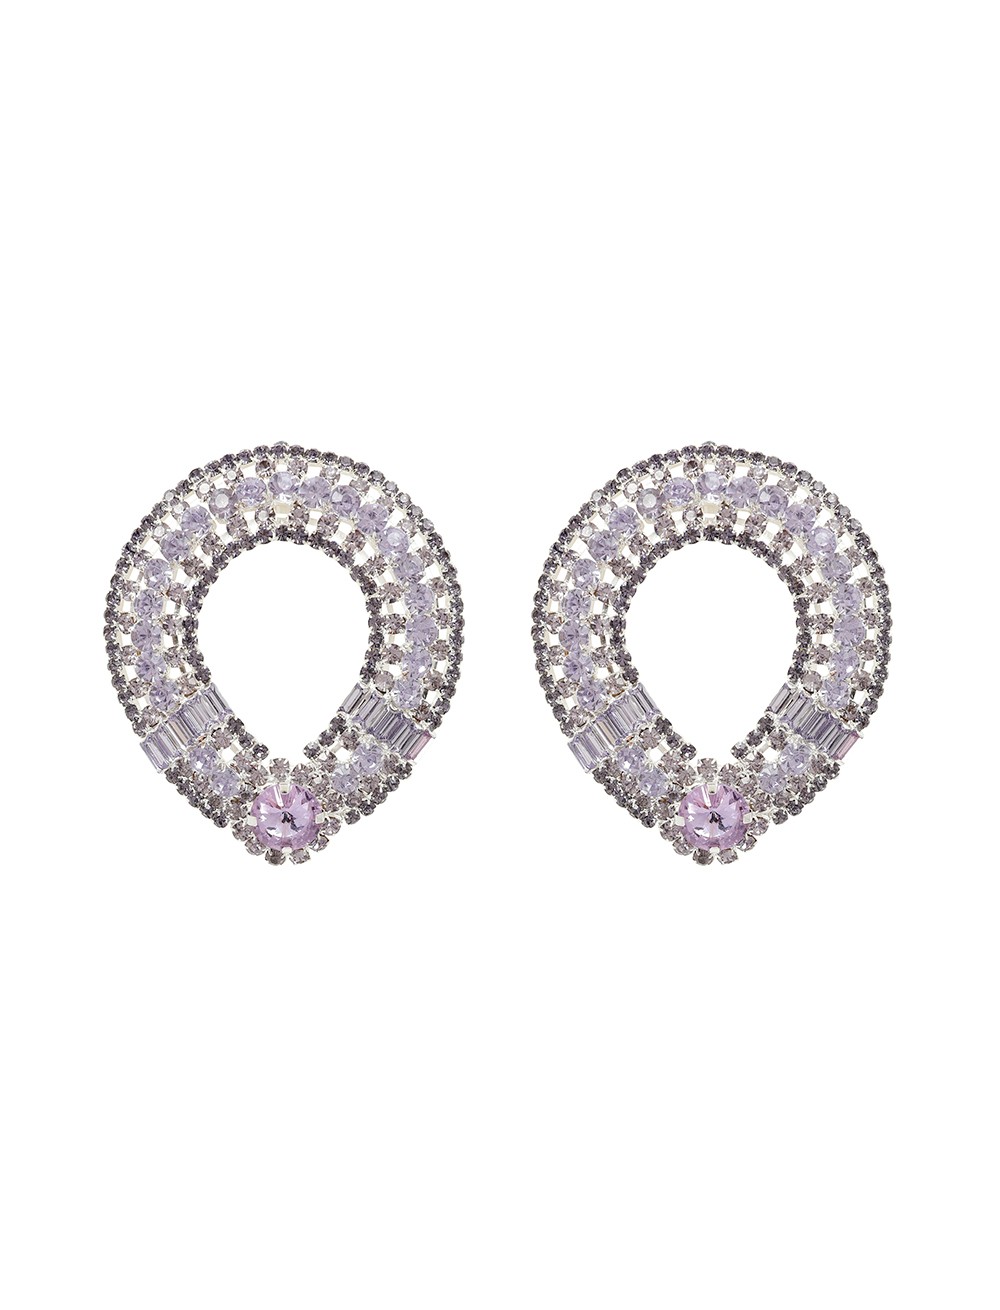 Silver Oval Earrings With Lilac Crystals